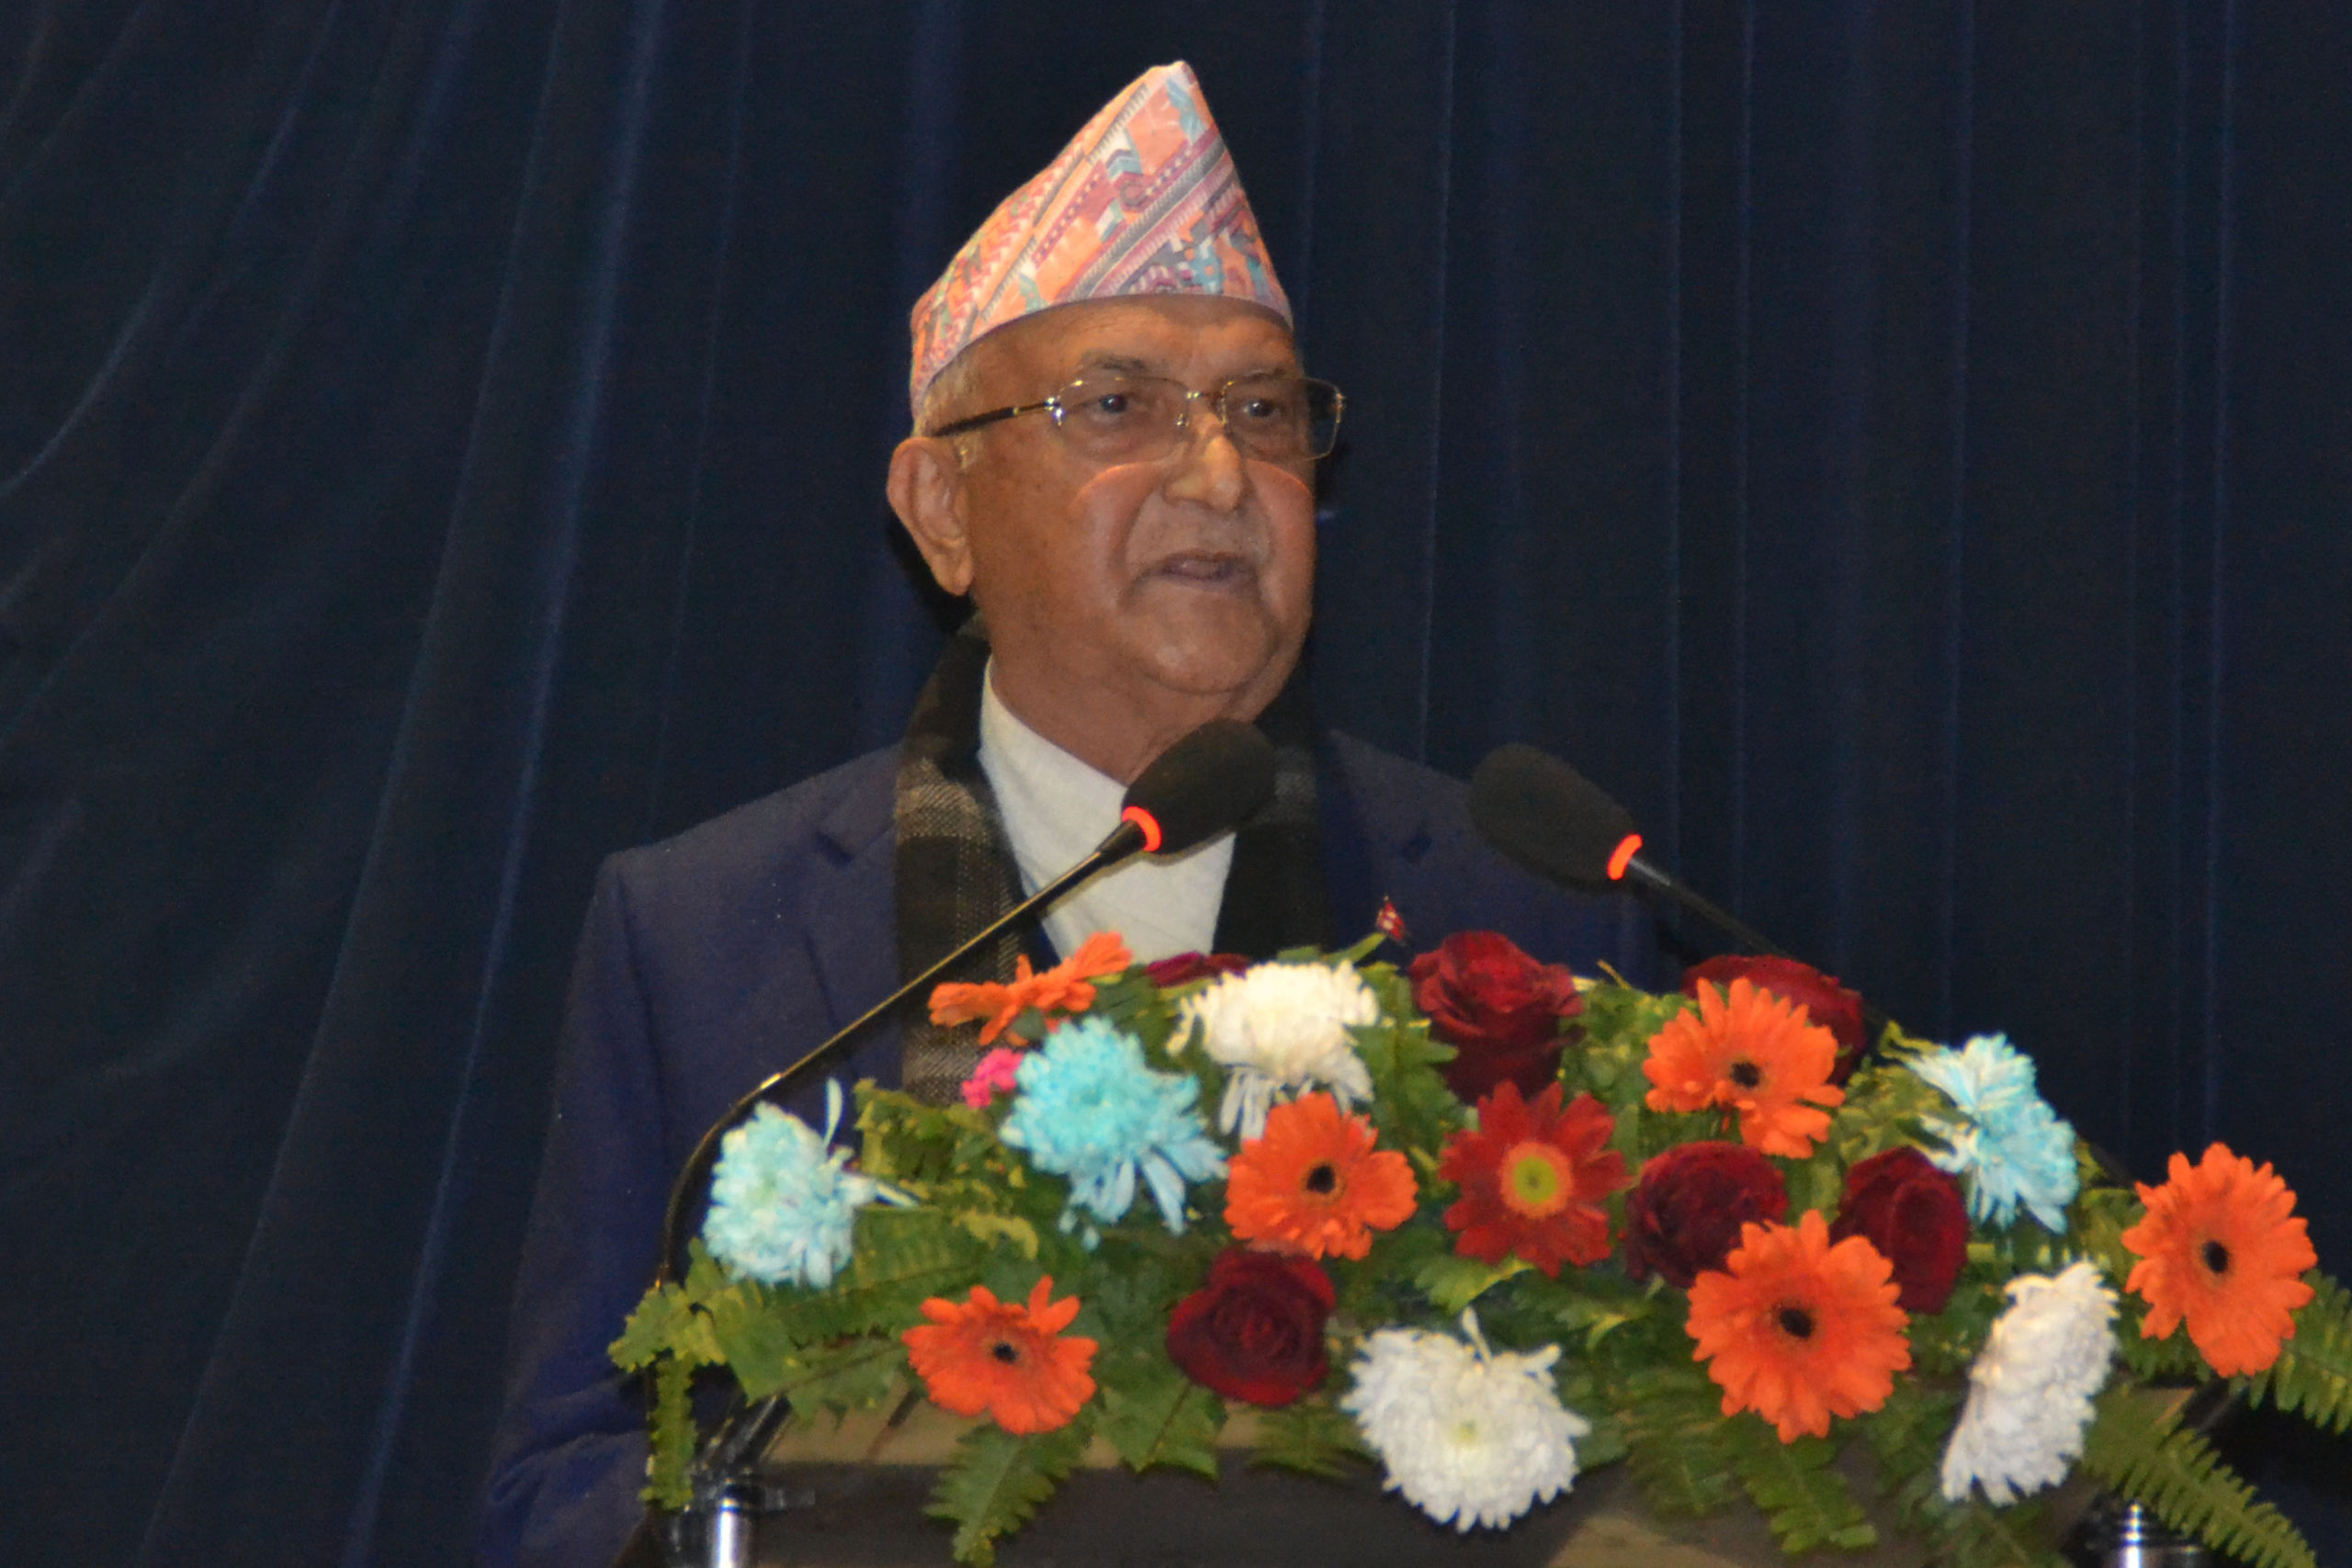 COVID-19 vaccination to start on Jan 27: PM Oli